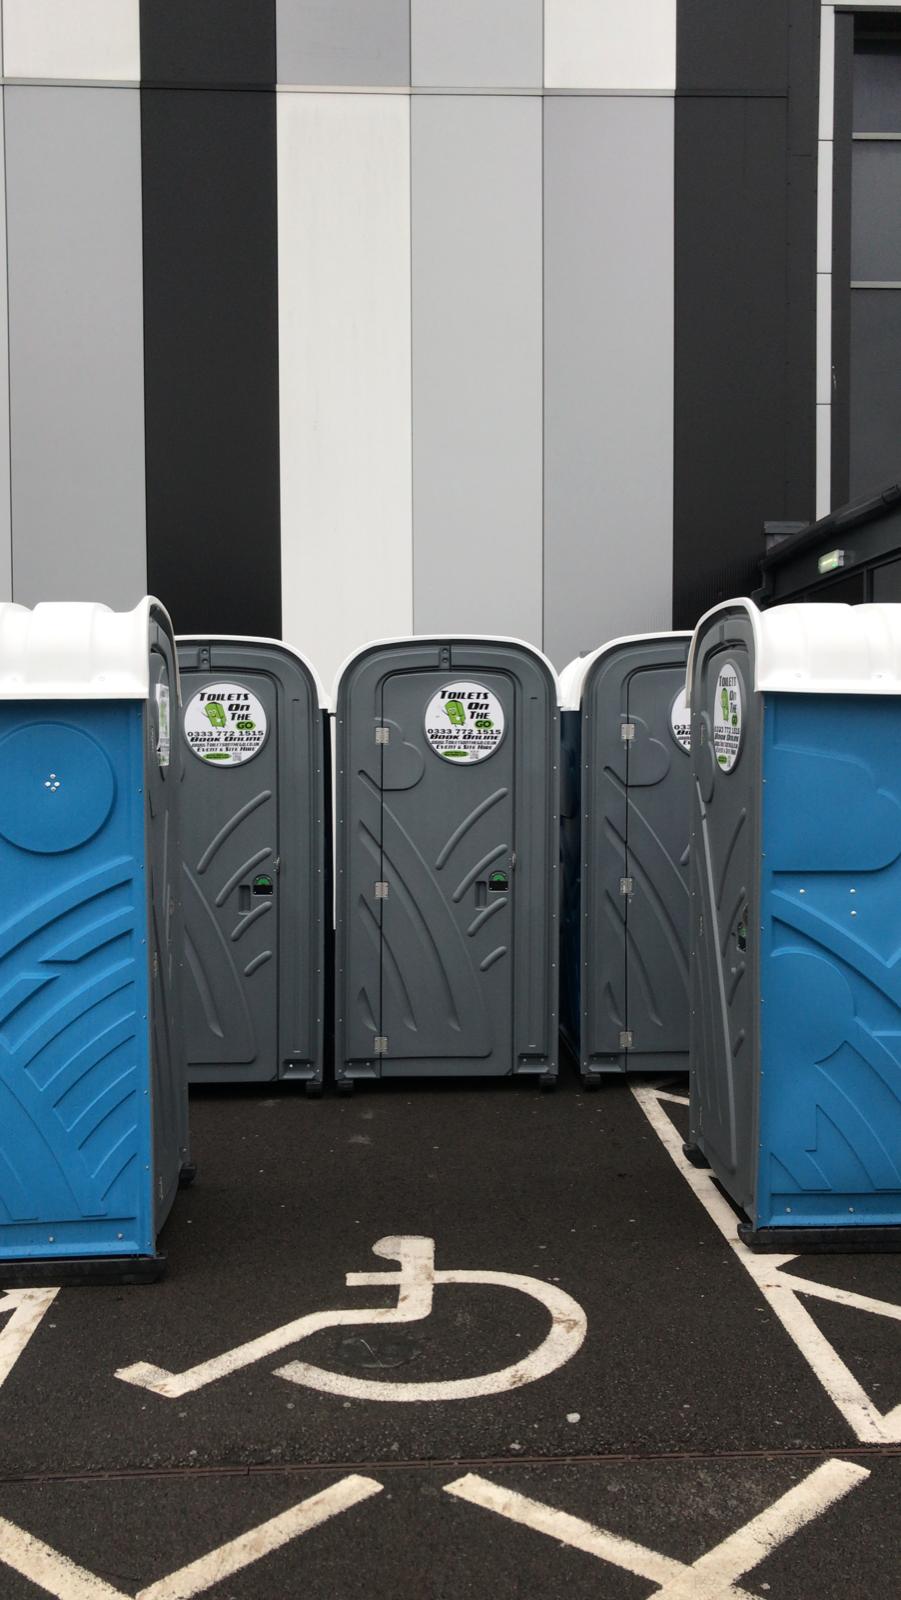 Gallery | Portable Toilet Loo Hire Rental Company in North West uk and Manchester gallery image 65